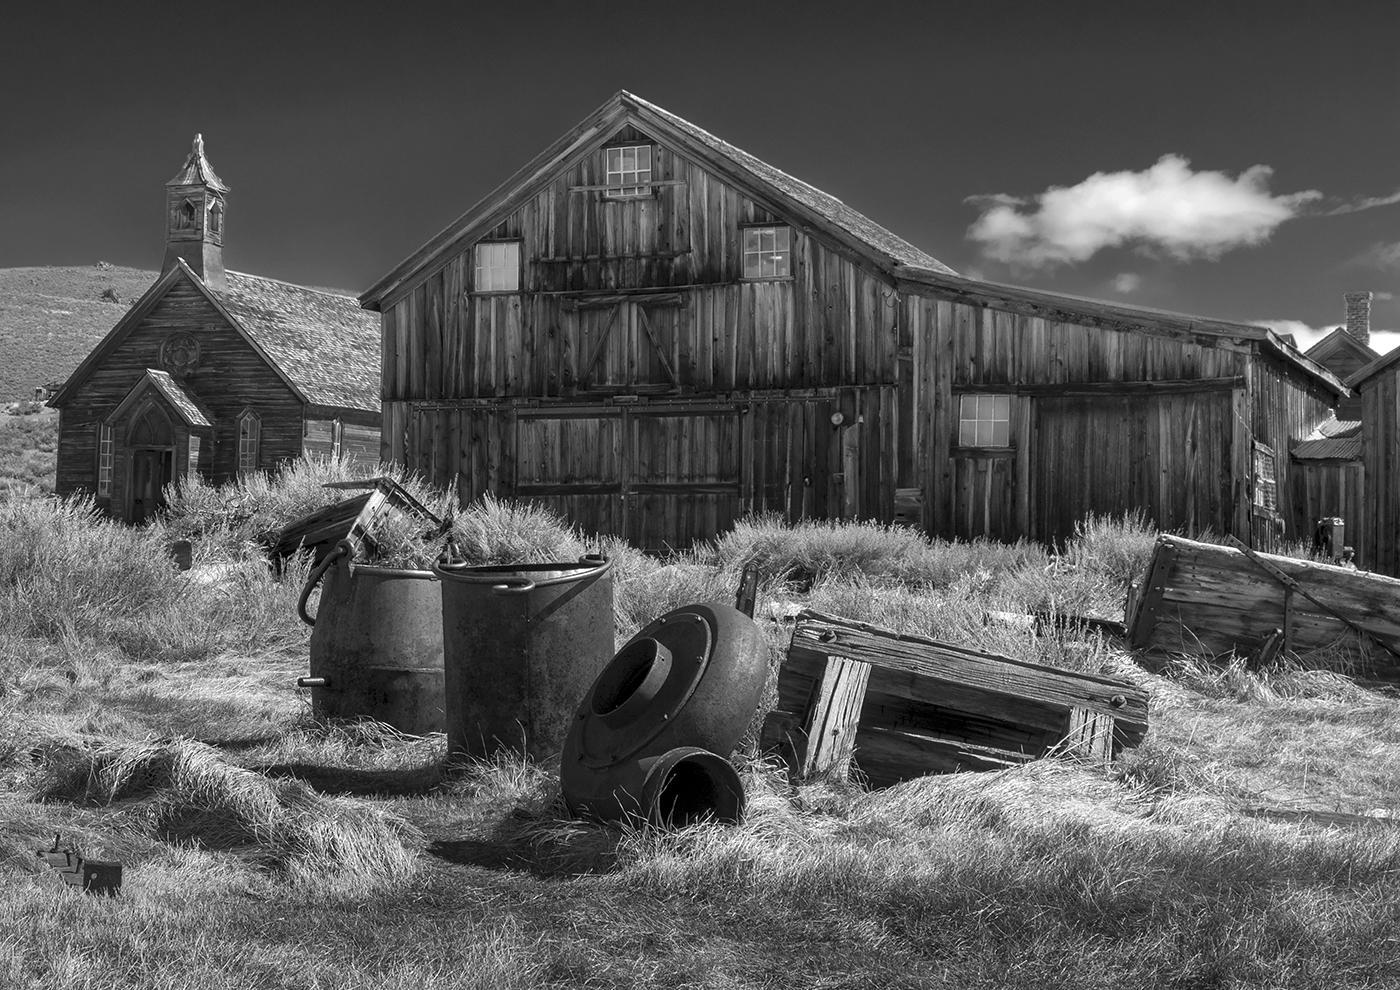 Ghost Town Relics by Paul Newey